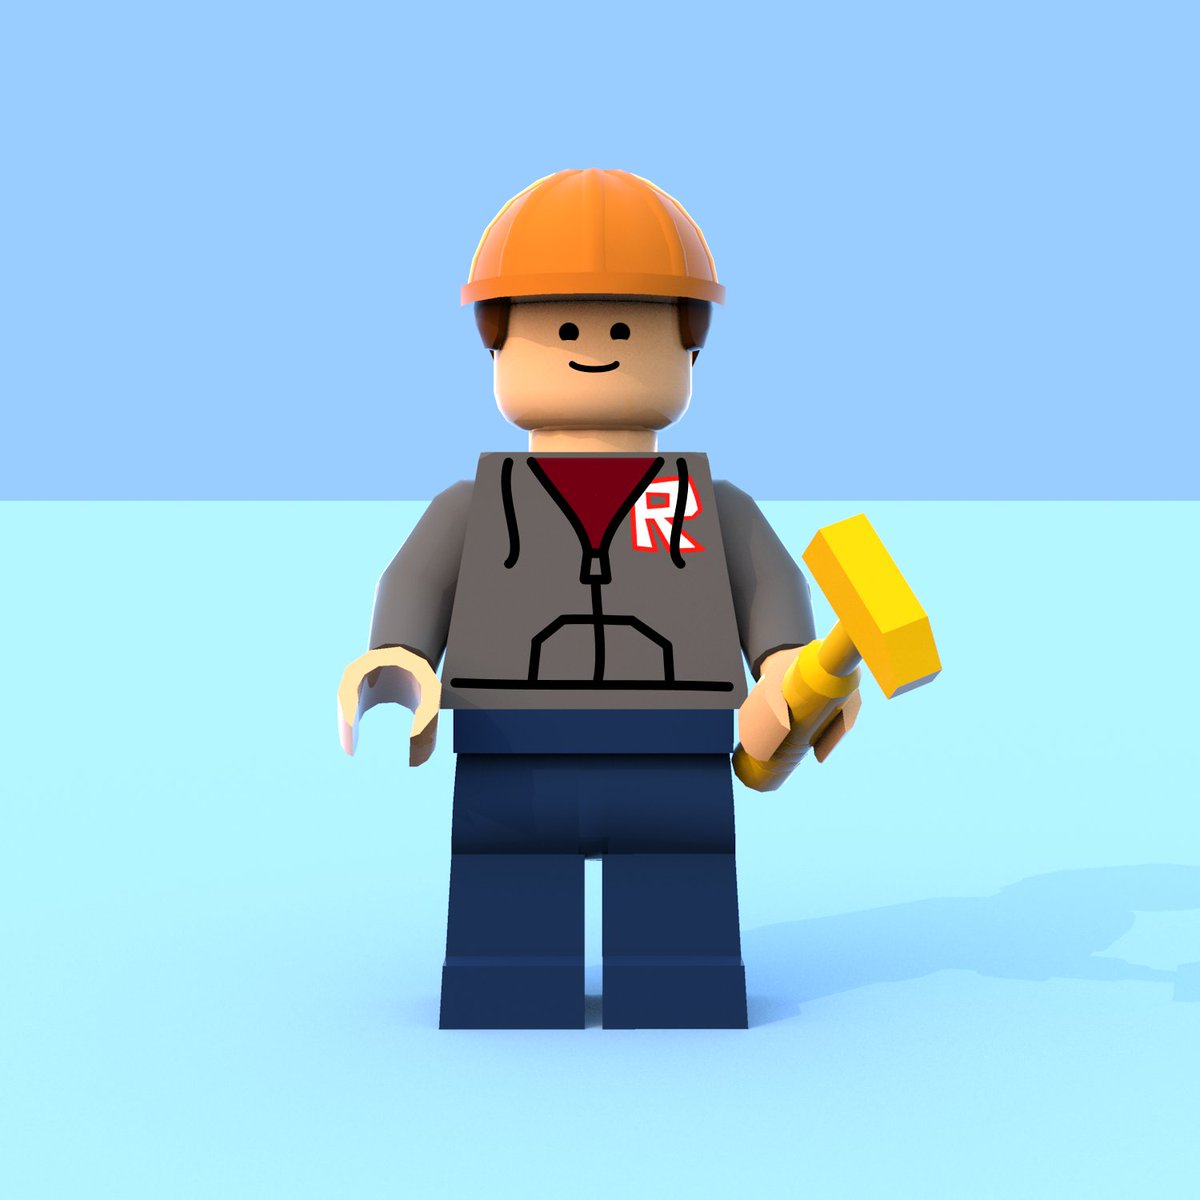 David Baszucki On Twitter Roblox Crossroads Proposed As A Lego Set Check Out 4sci S Legoideas Submission Https T Co 08emkkmrcz Https T Co Yzarllbwxv